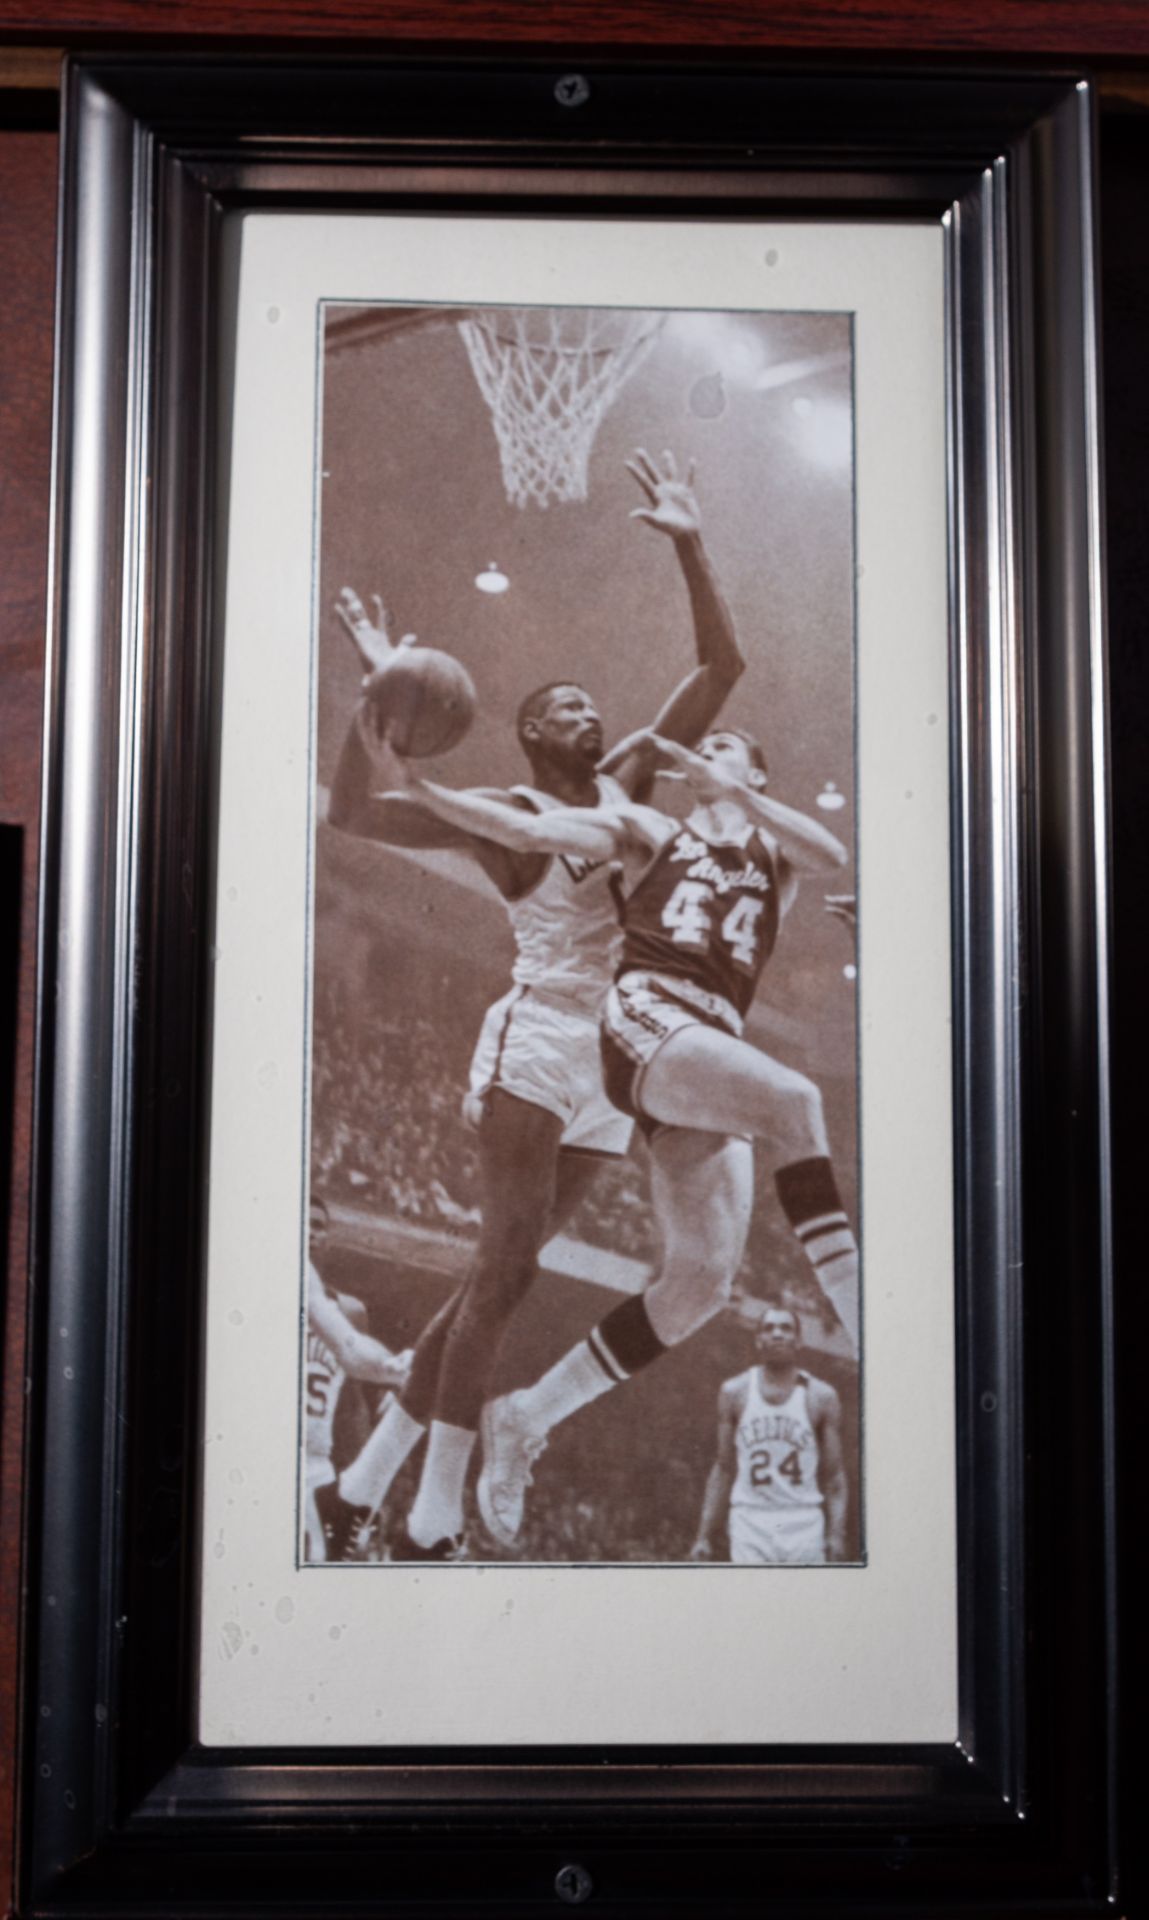 Bill Russell and Jerry West Photo, Framed, 10"x16"